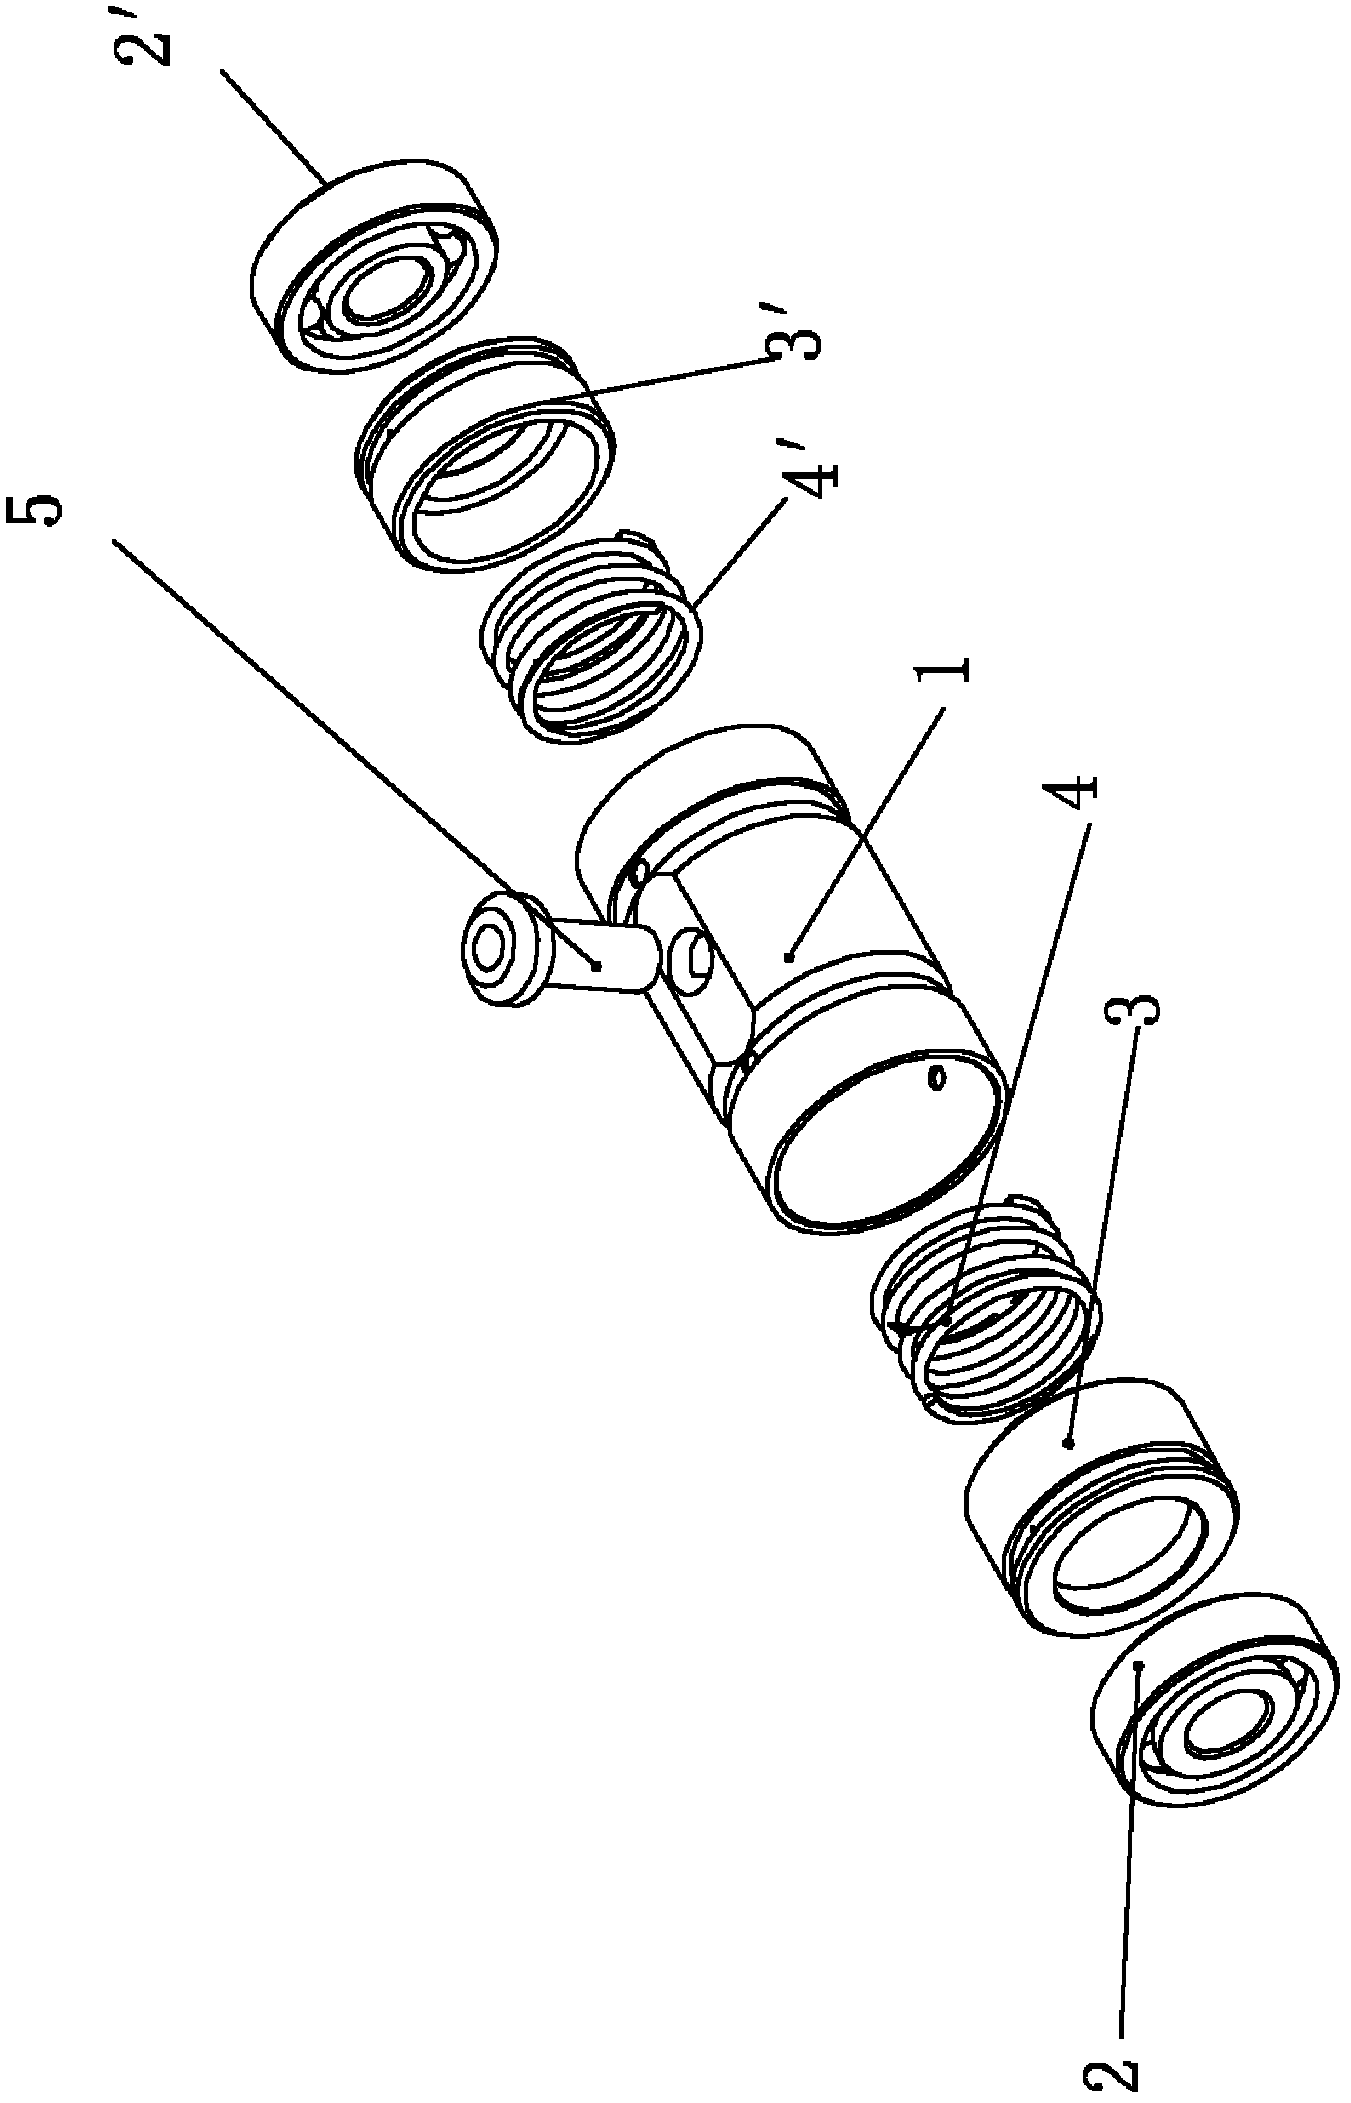 Rotor Support Mechanism of Rolling Bearing Turbocharger